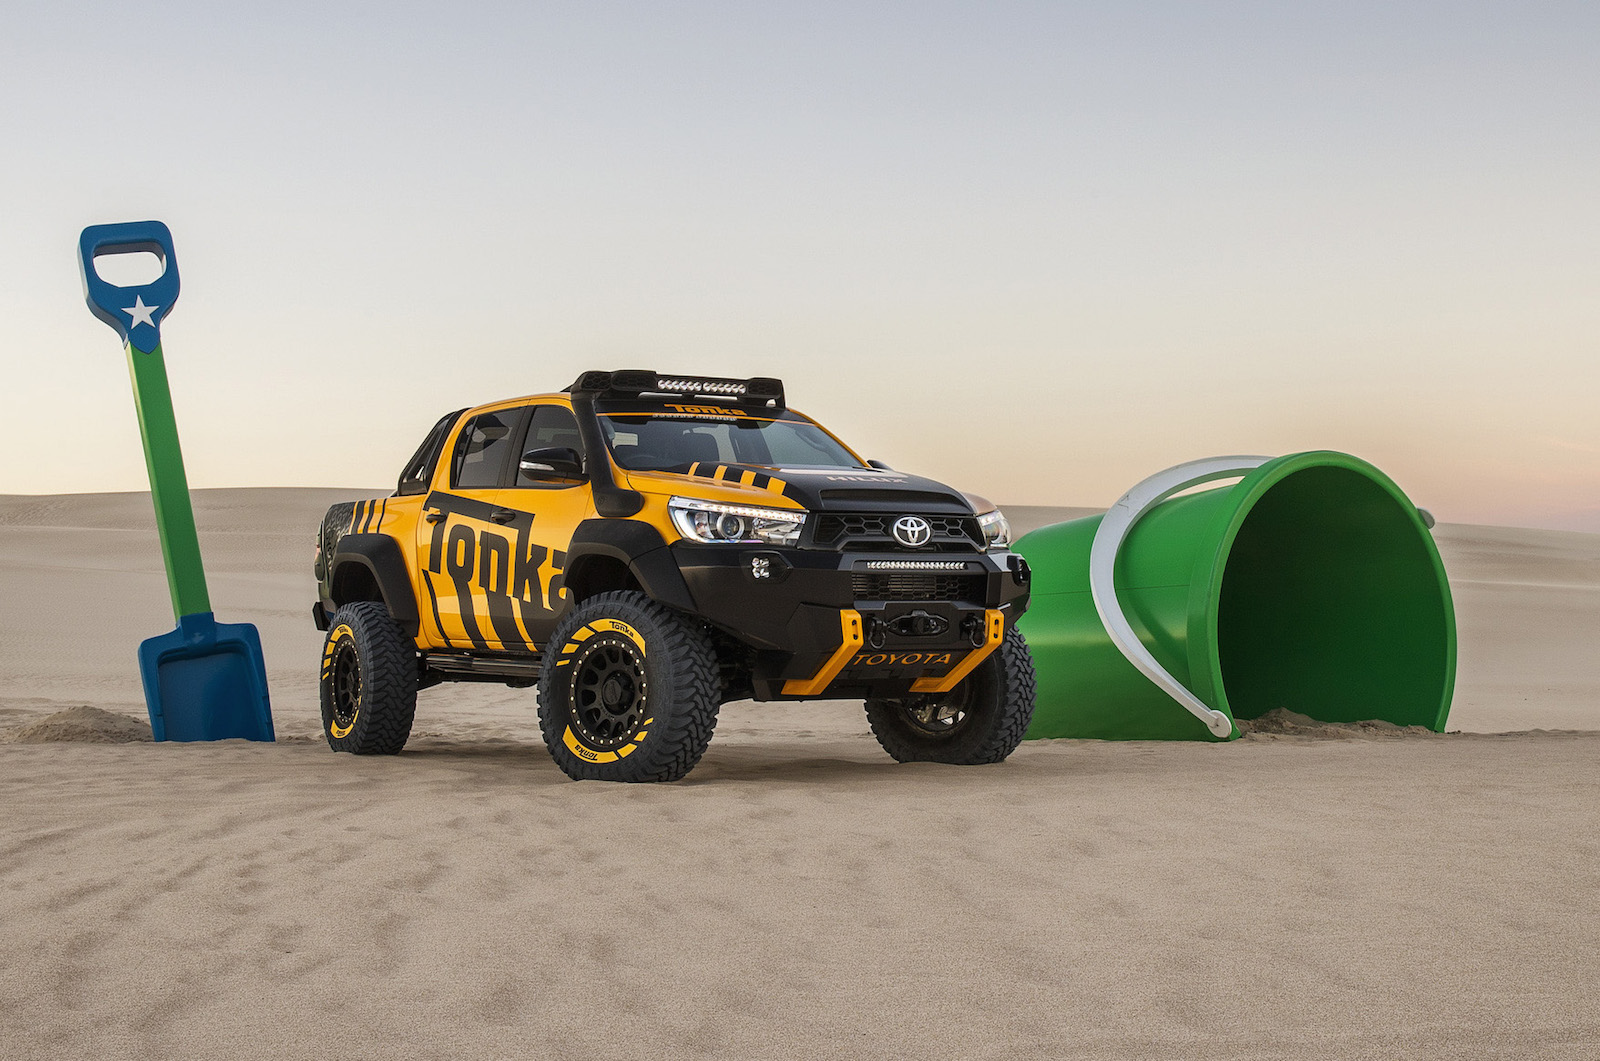 Toyota HiLux Tonka concept revealed as hardcore off-roader